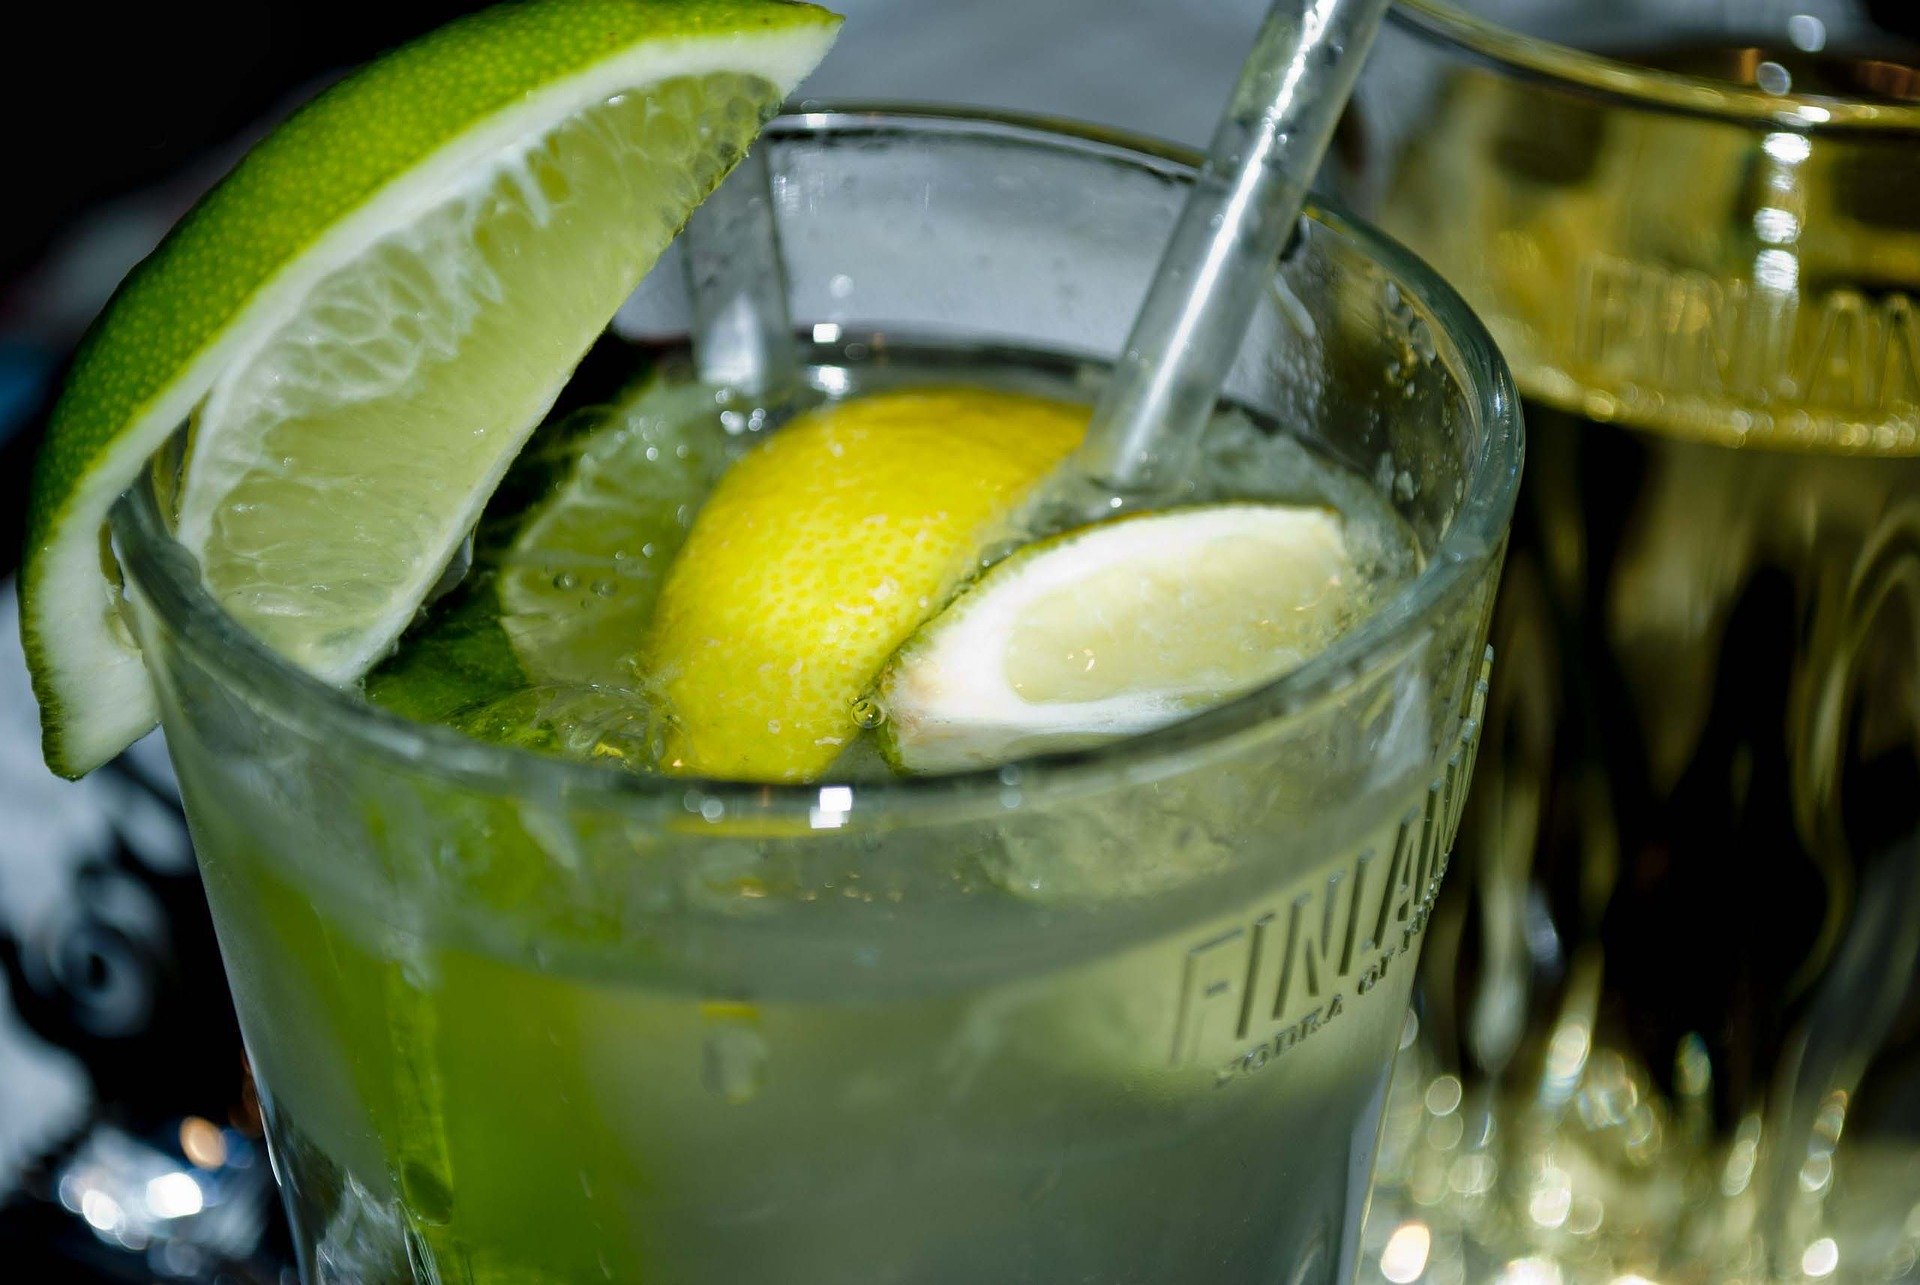 More mixed drinks are made with vodka than any other liquor.